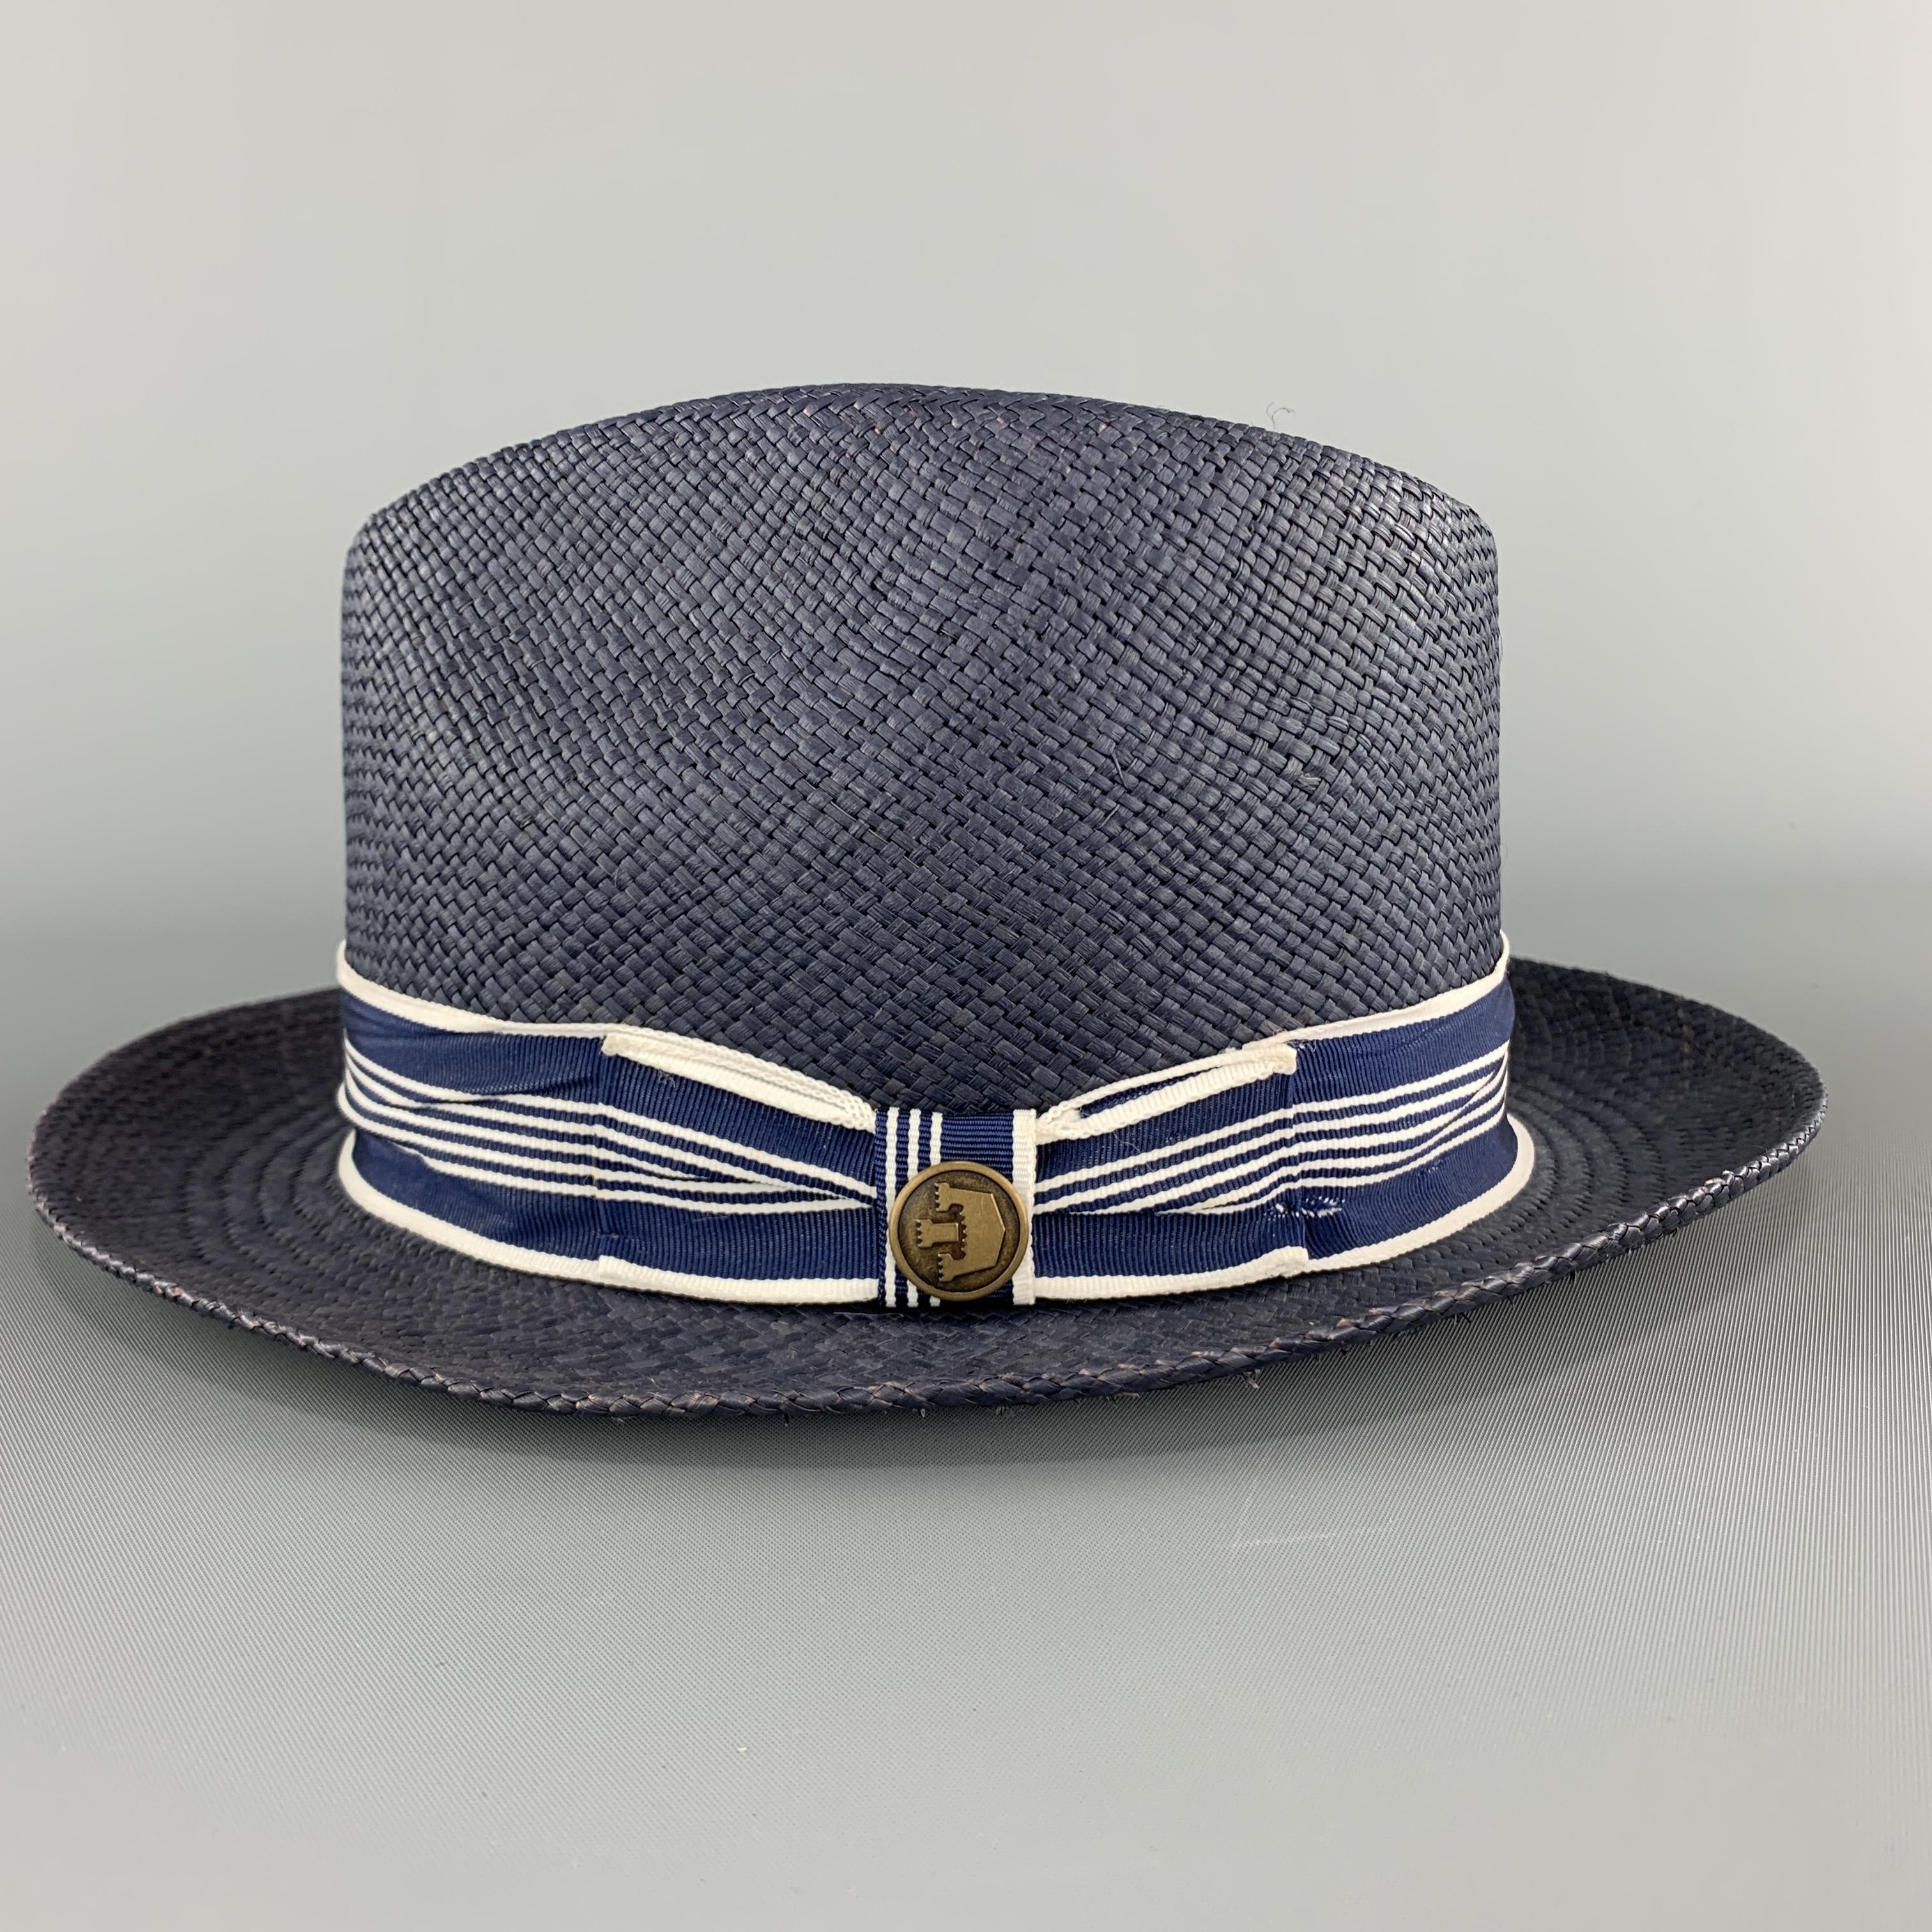 GOORIN BROTHERS fedora comes in navy woven straw with a striped ribbon trim. 

Excellent Pre-Owned Condition.
Marked: Small

Measurements:

Opening: 22.5 in.
Brim: 2 in.
Height: 4.25 in.